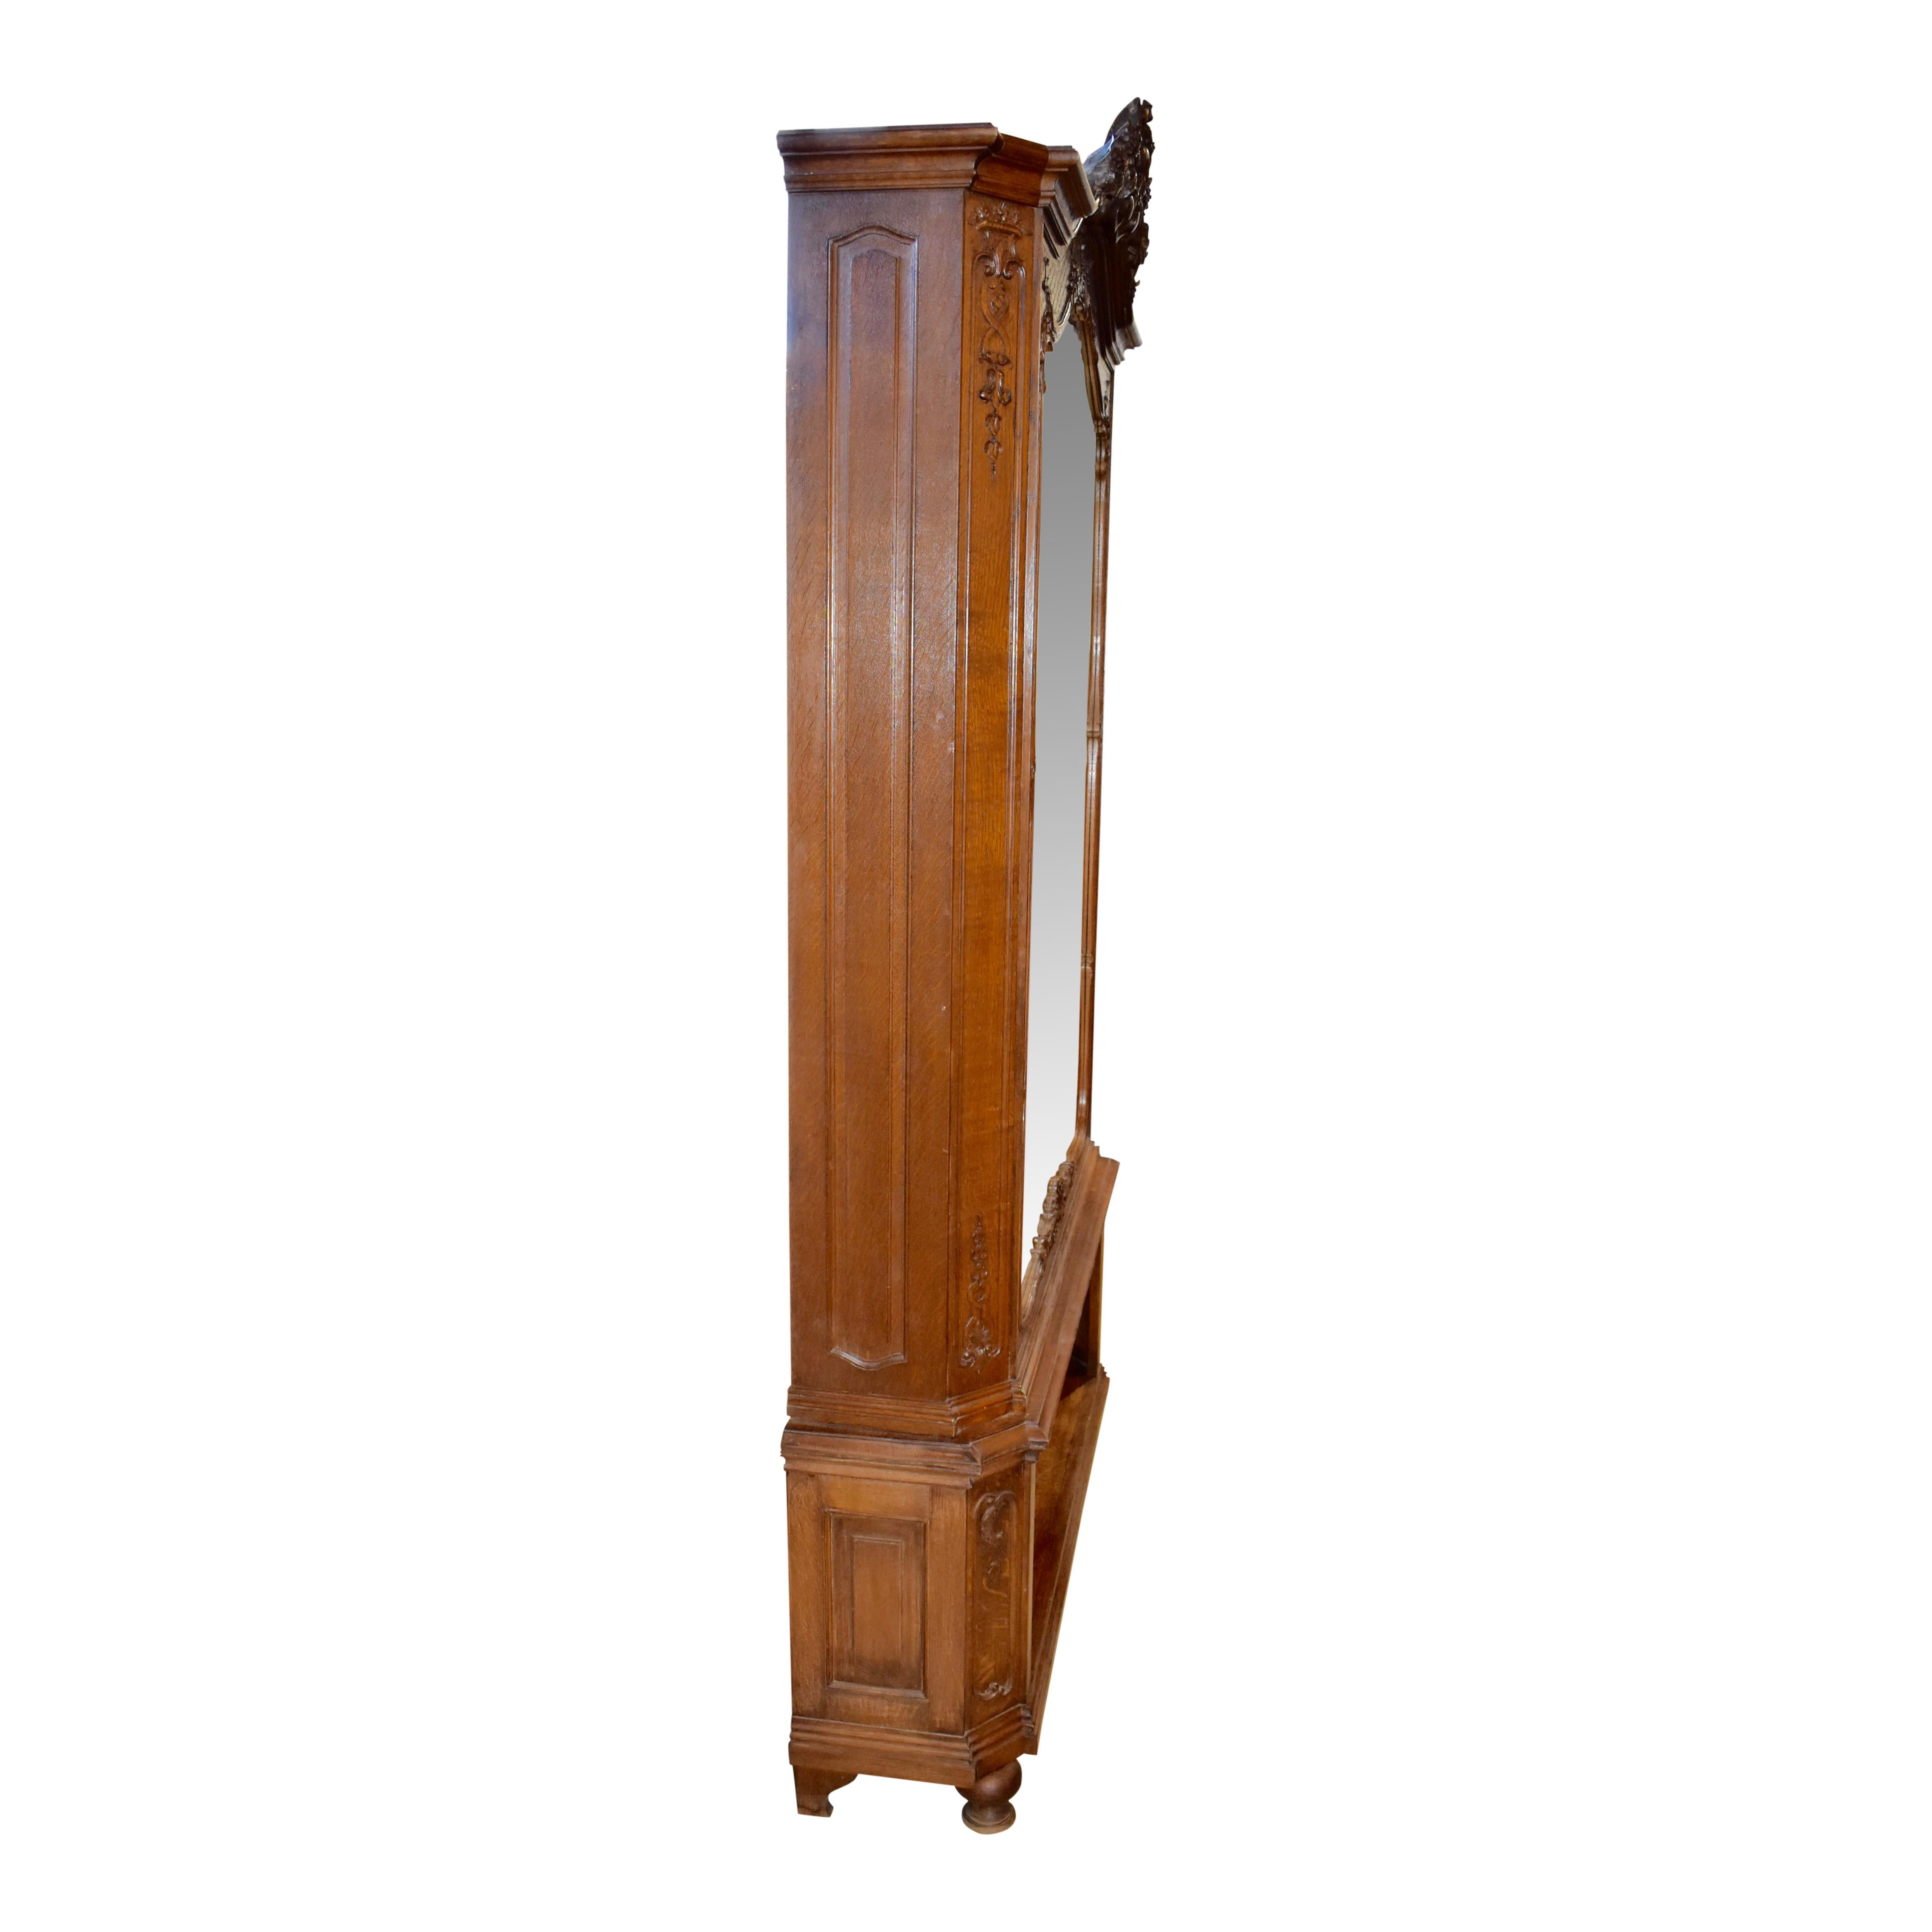 Add light and depth to any room with this substantial Louis XV dressing mirror. Its carved oak frame features an arched bonnet crowned with a bold display of fanned leaves flanked by small flowers nestled in scrolled leaves. Additional dainty